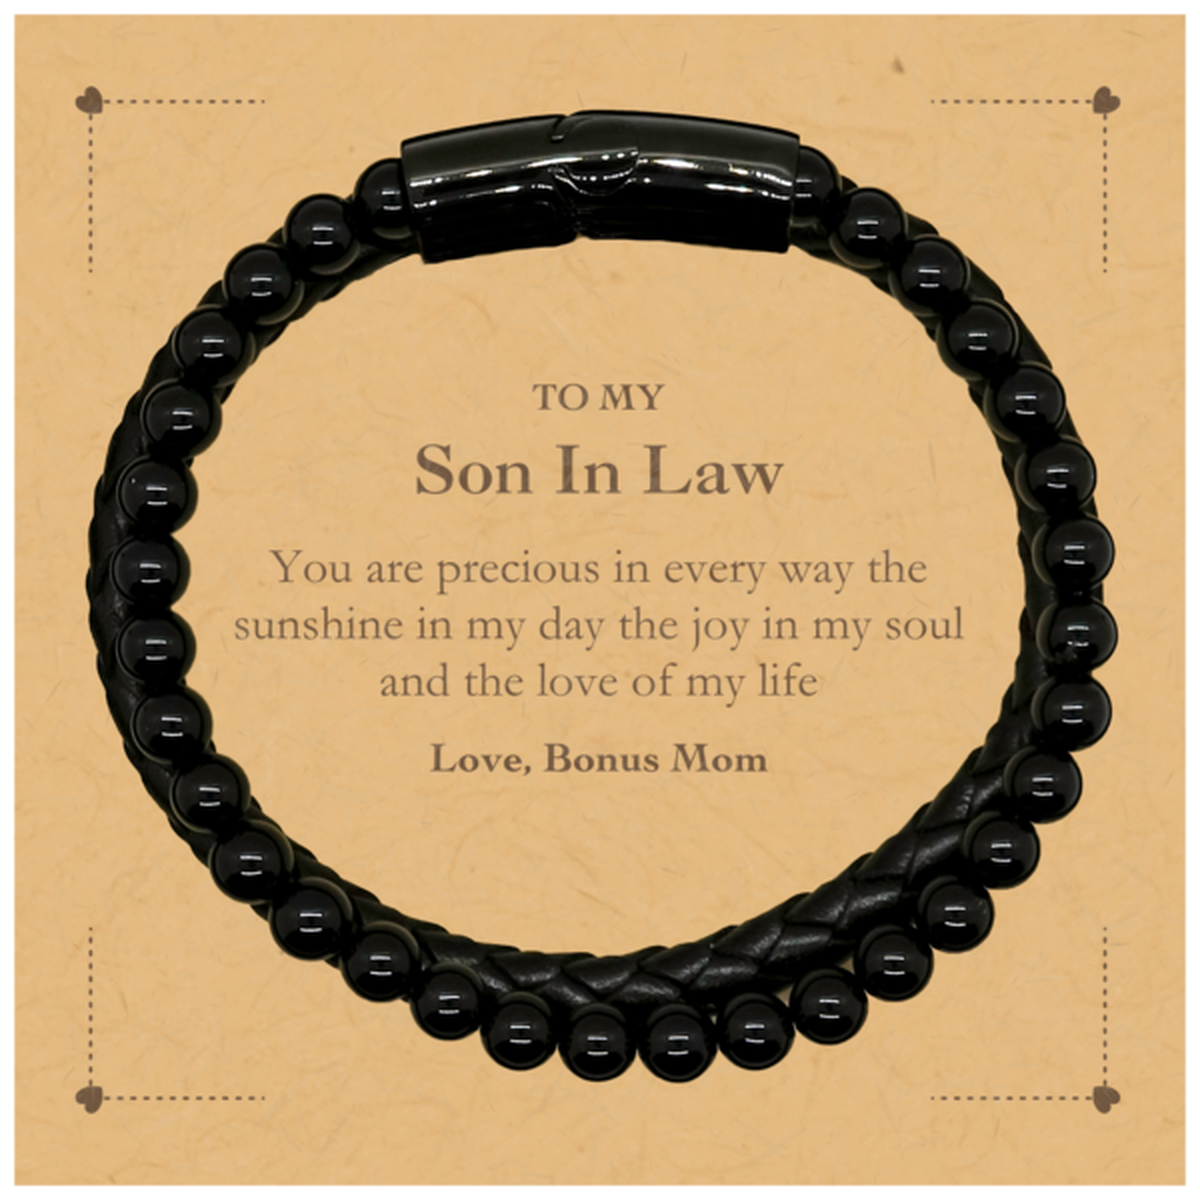 Graduation Gifts for Son In Law Stone Leather Bracelets Present from Bonus Mom, Christmas Son In Law Birthday Gifts Son In Law You are precious in every way the sunshine in my day. Love, Bonus Mom